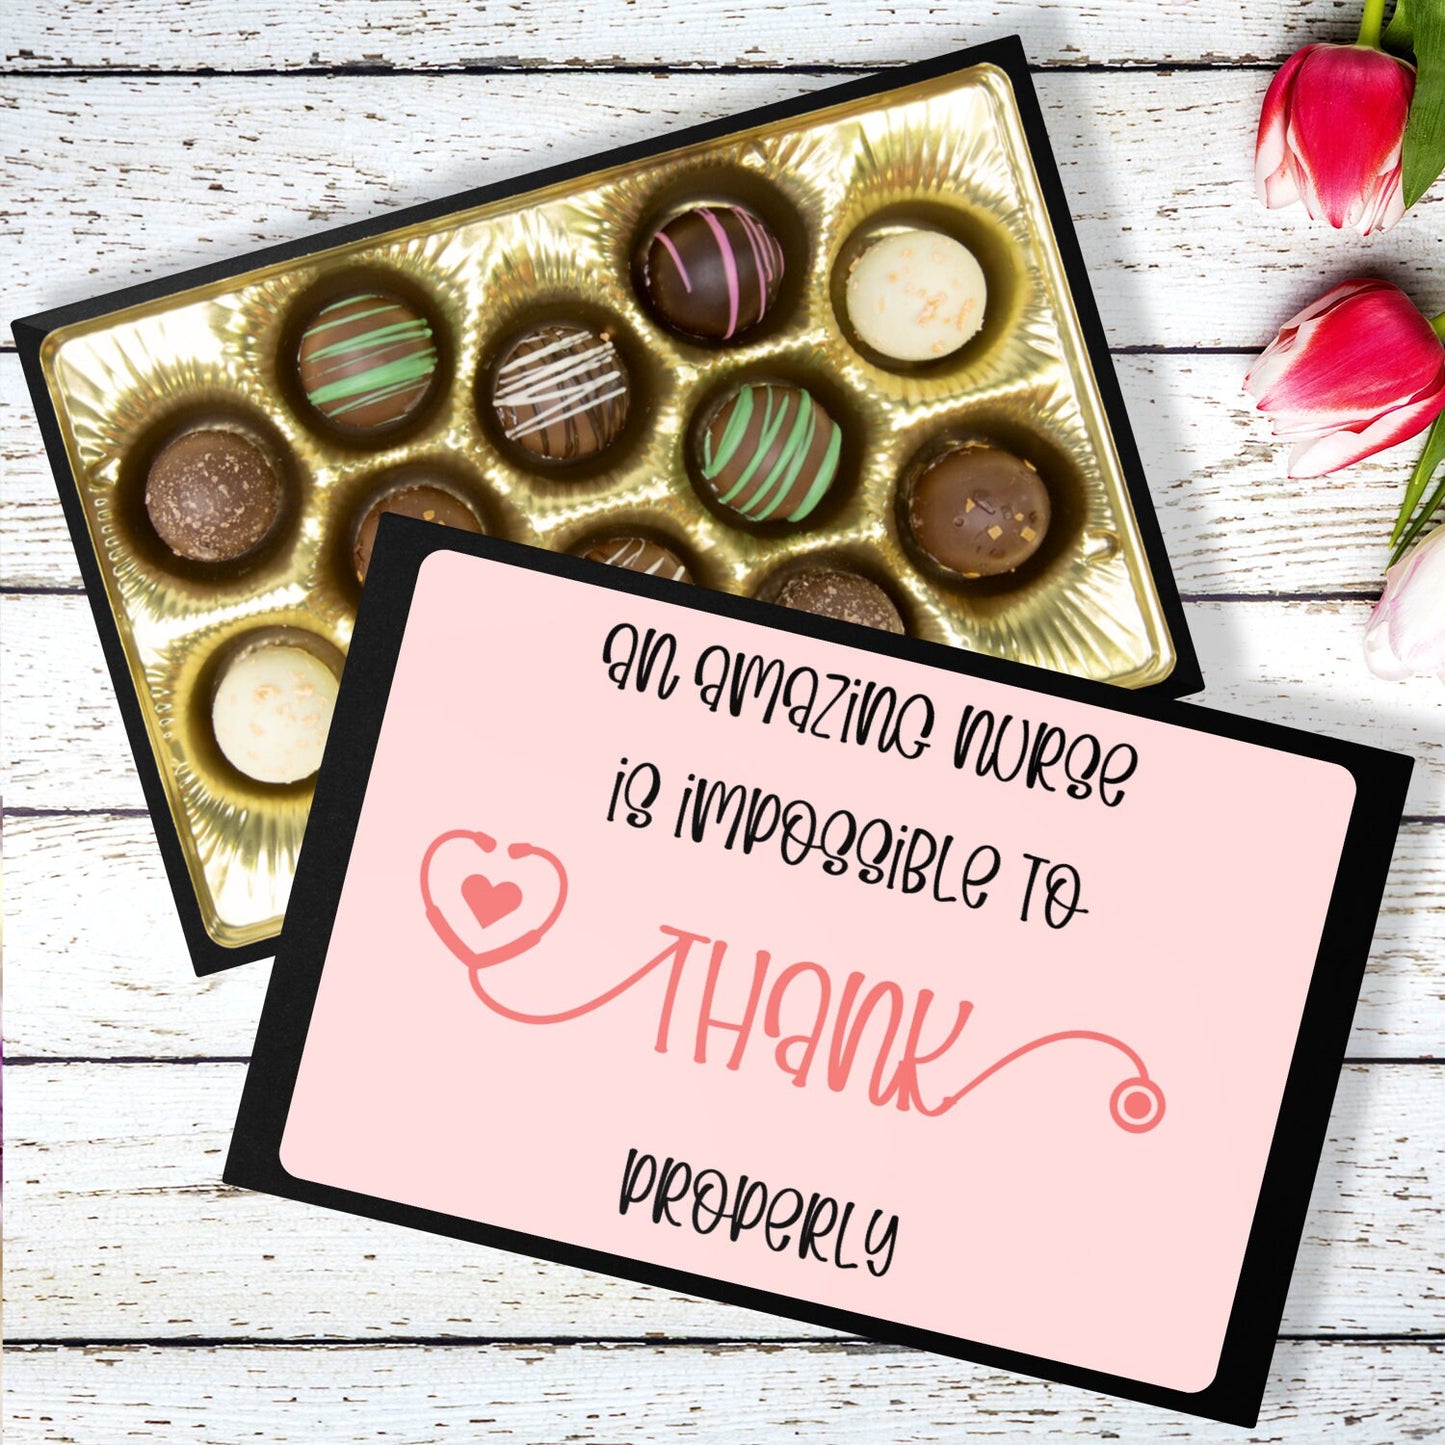 Nurse Thank You Gift, Personalized Chocolate Box Gift, Chocolate Truffles, Nurse Appreciation Gift, Nurse, Medical Thank You Gifts